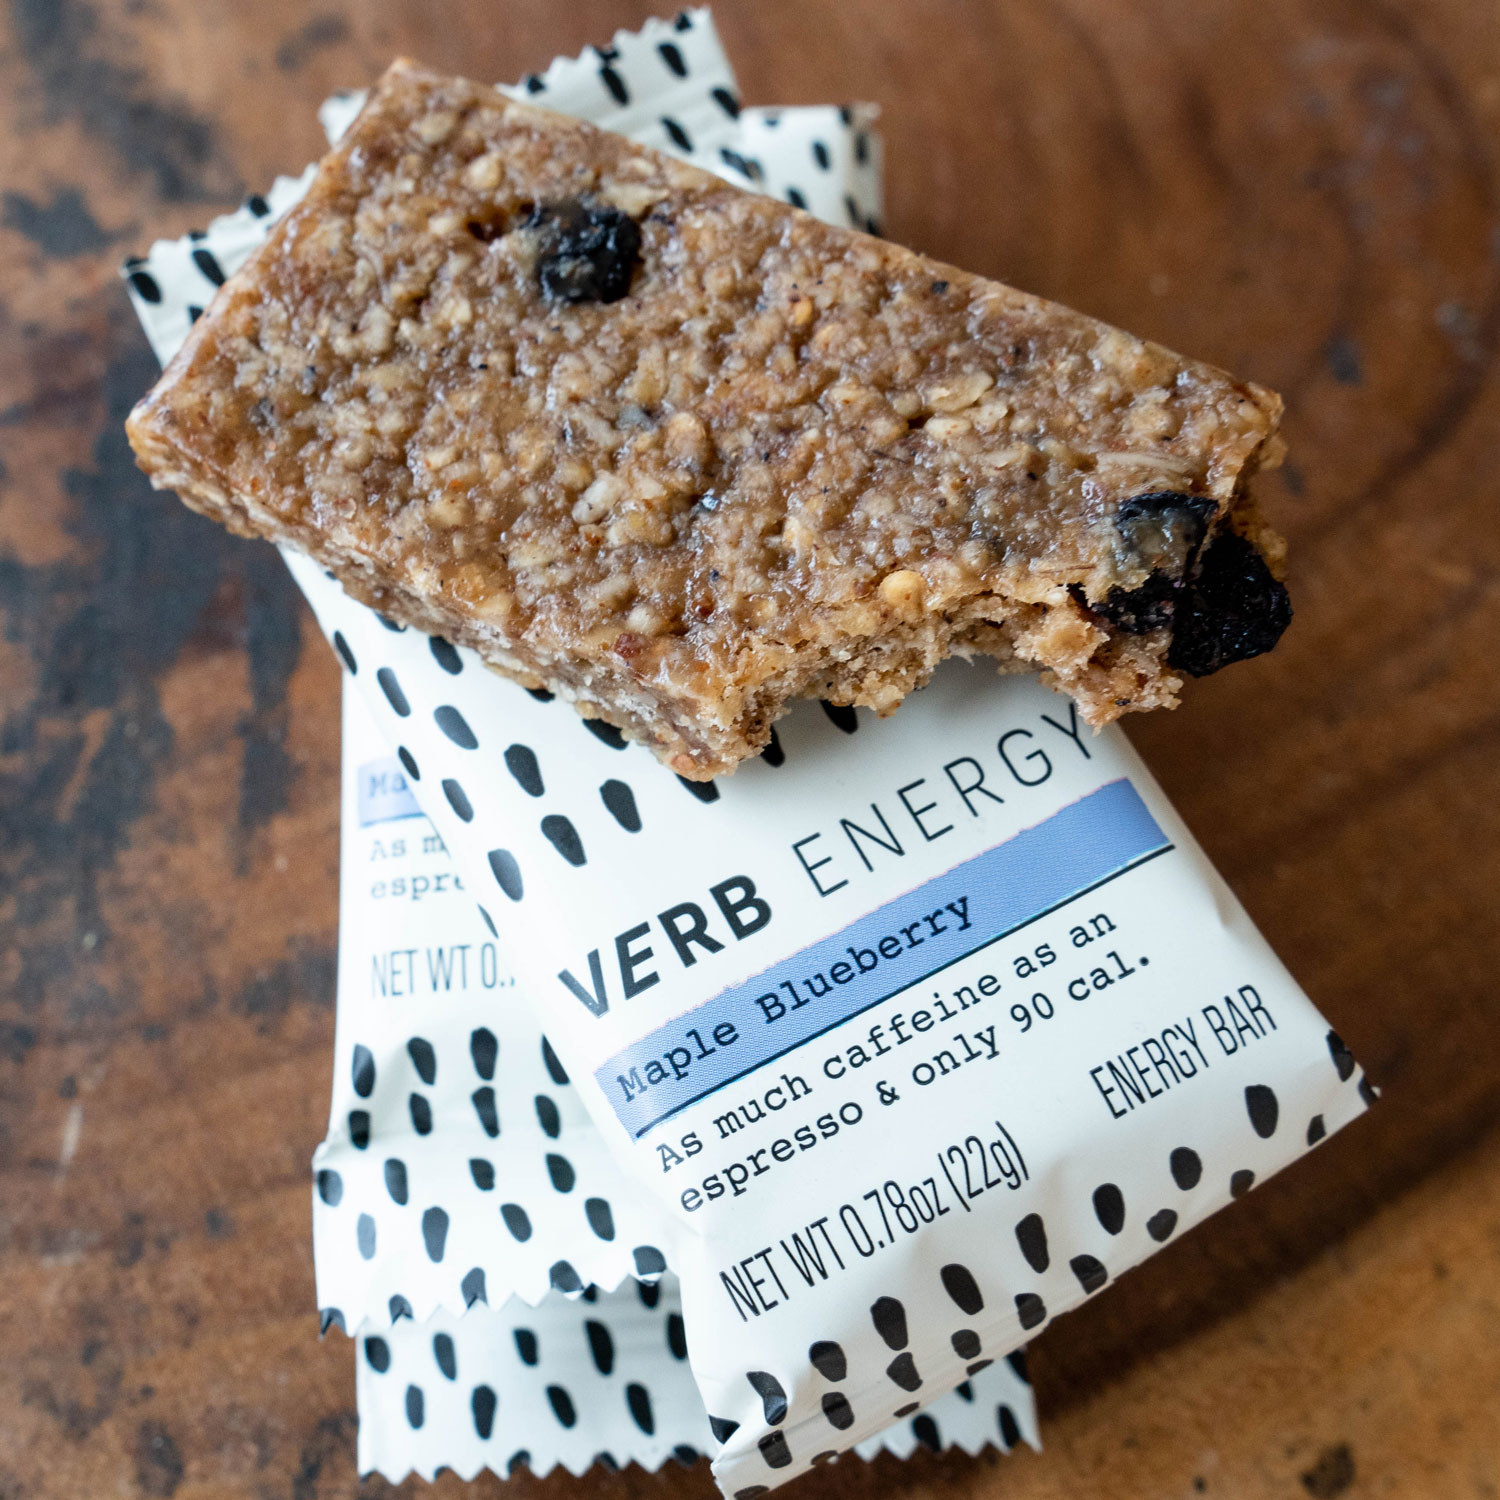 A blueberry oat bar on top of a packaged bar